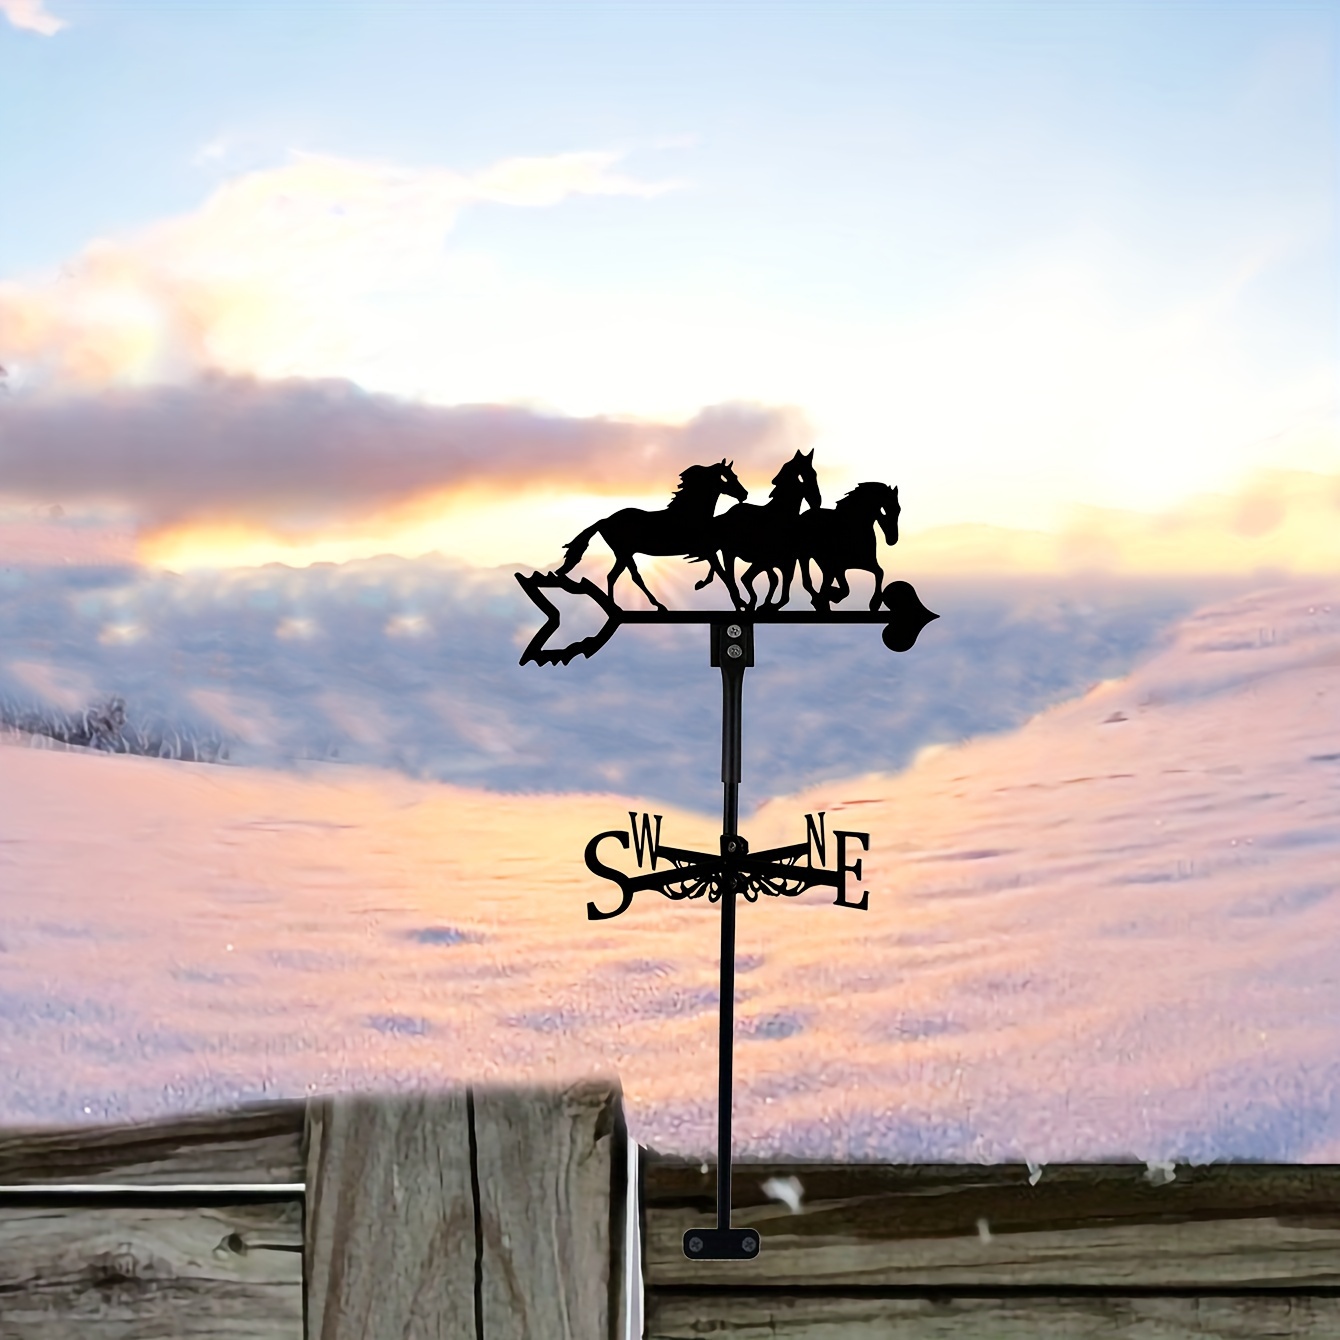 

1pc Funny Horse Weather Vane, Metal Silhouette Wind Direction Indicator, Roof Fence Mount, Yard, Farm, Lawn, Outdoor